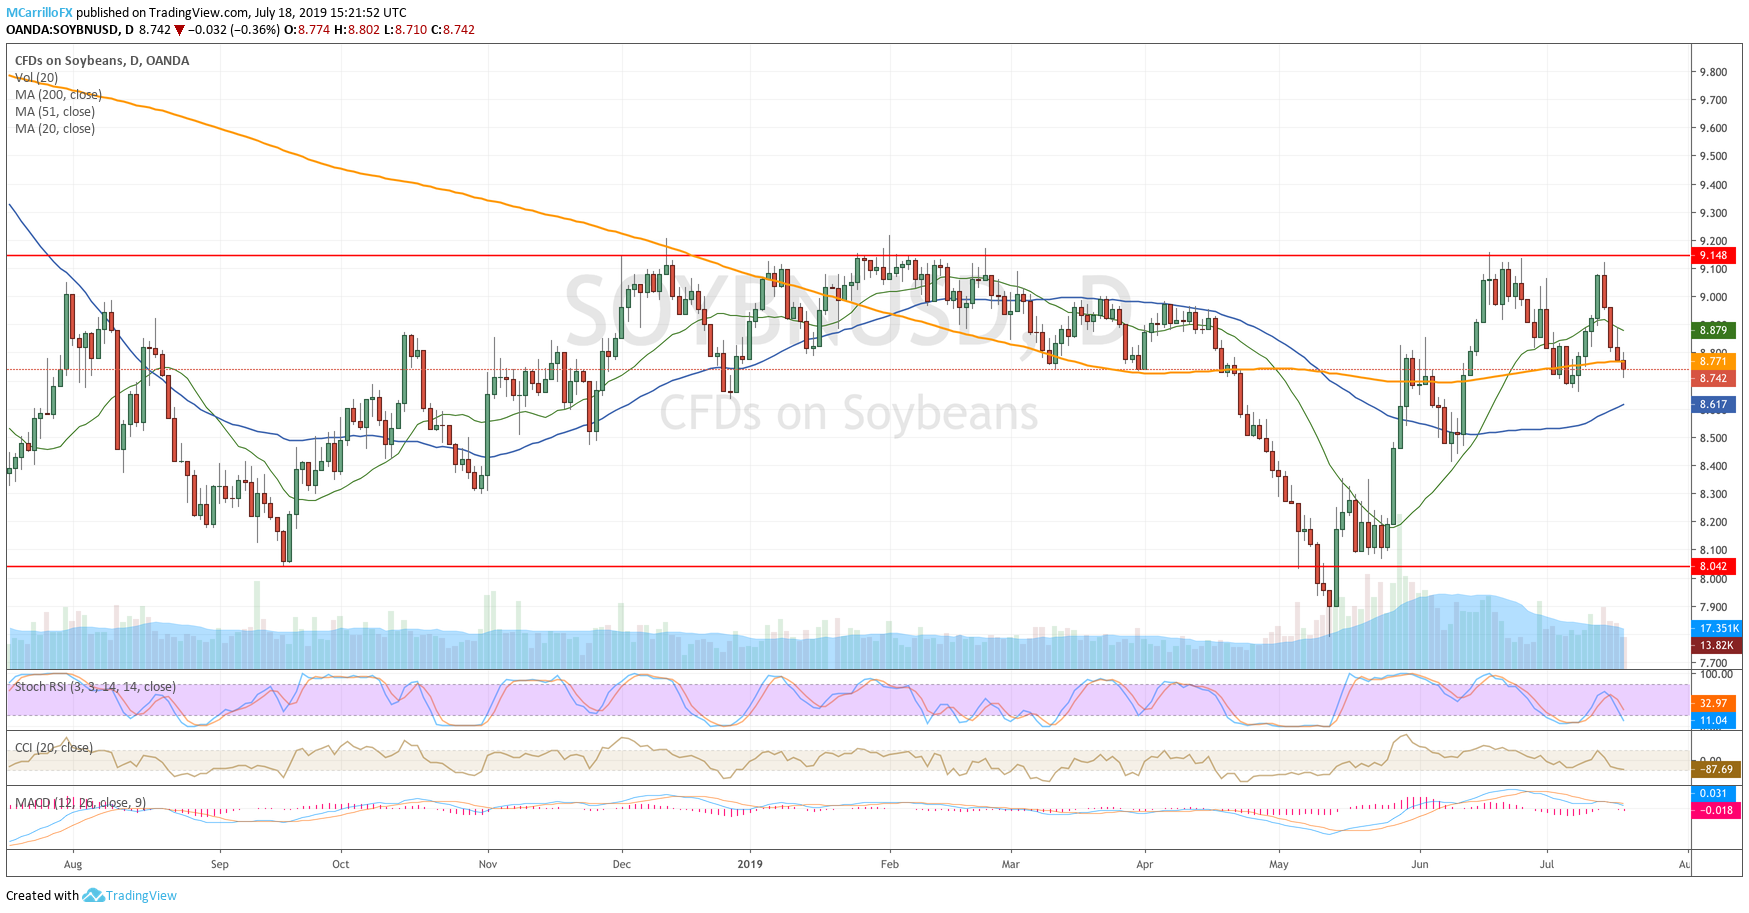 Soybeans daily chart July 18